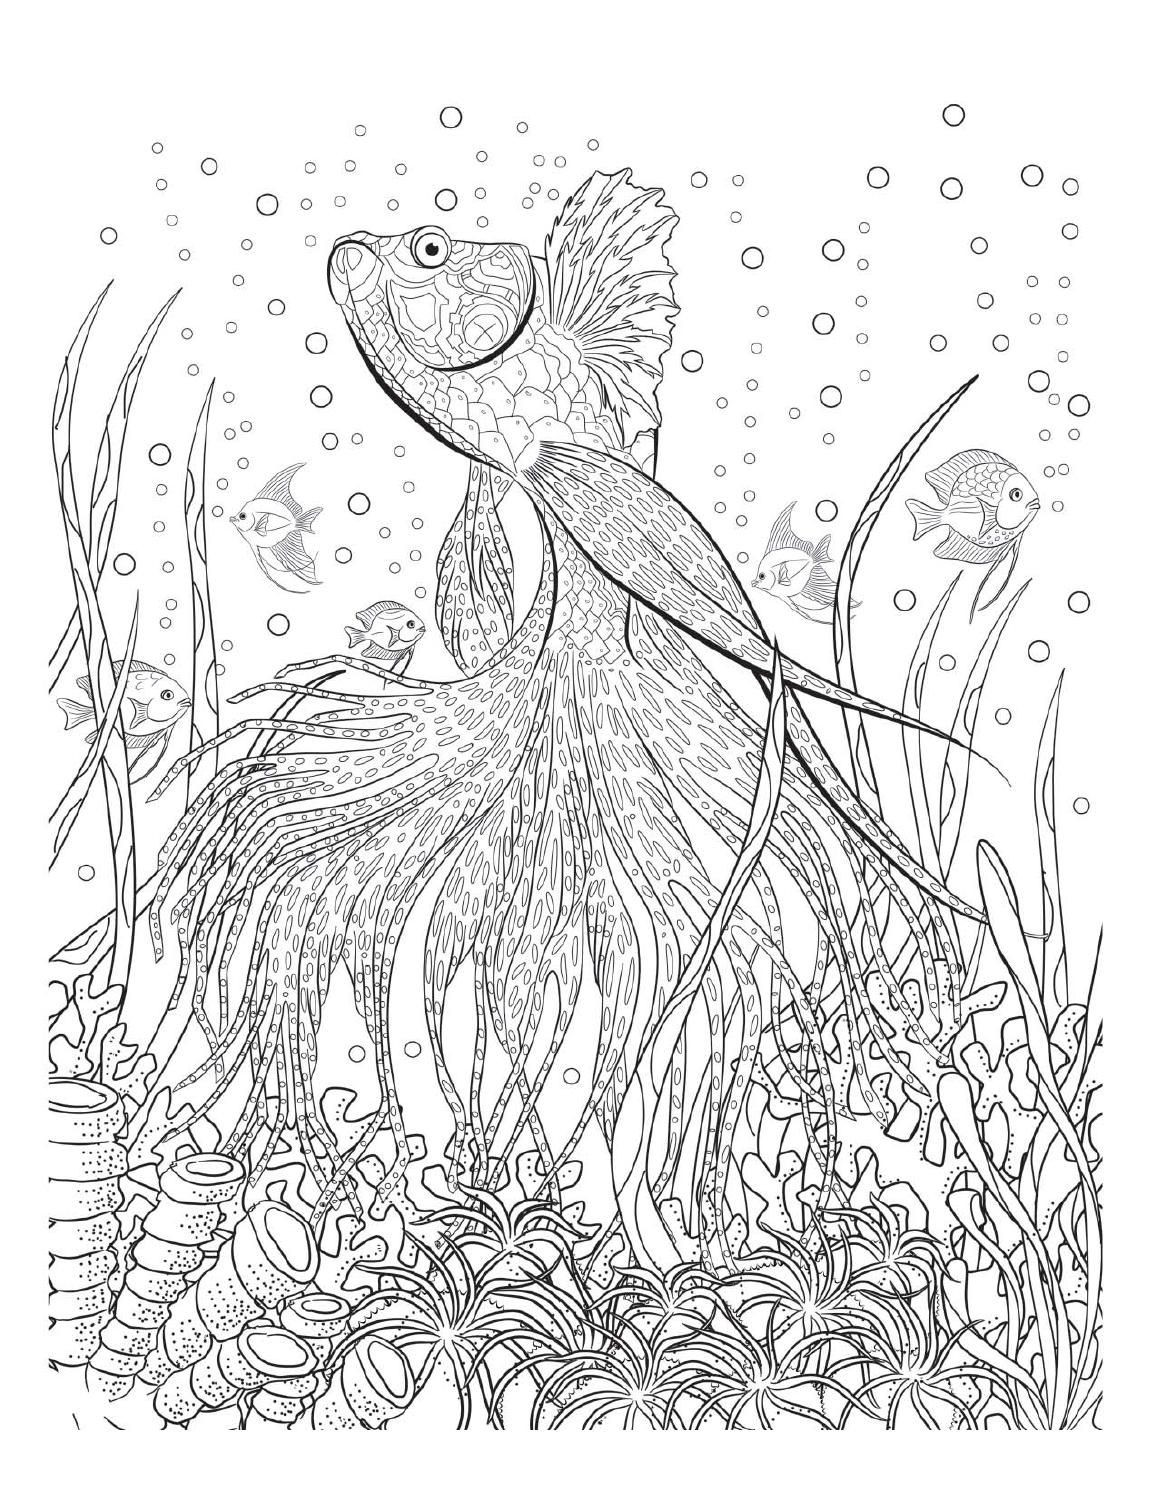 Ocean Coloring Pages For Adults
 Oceana sheets music & coloring